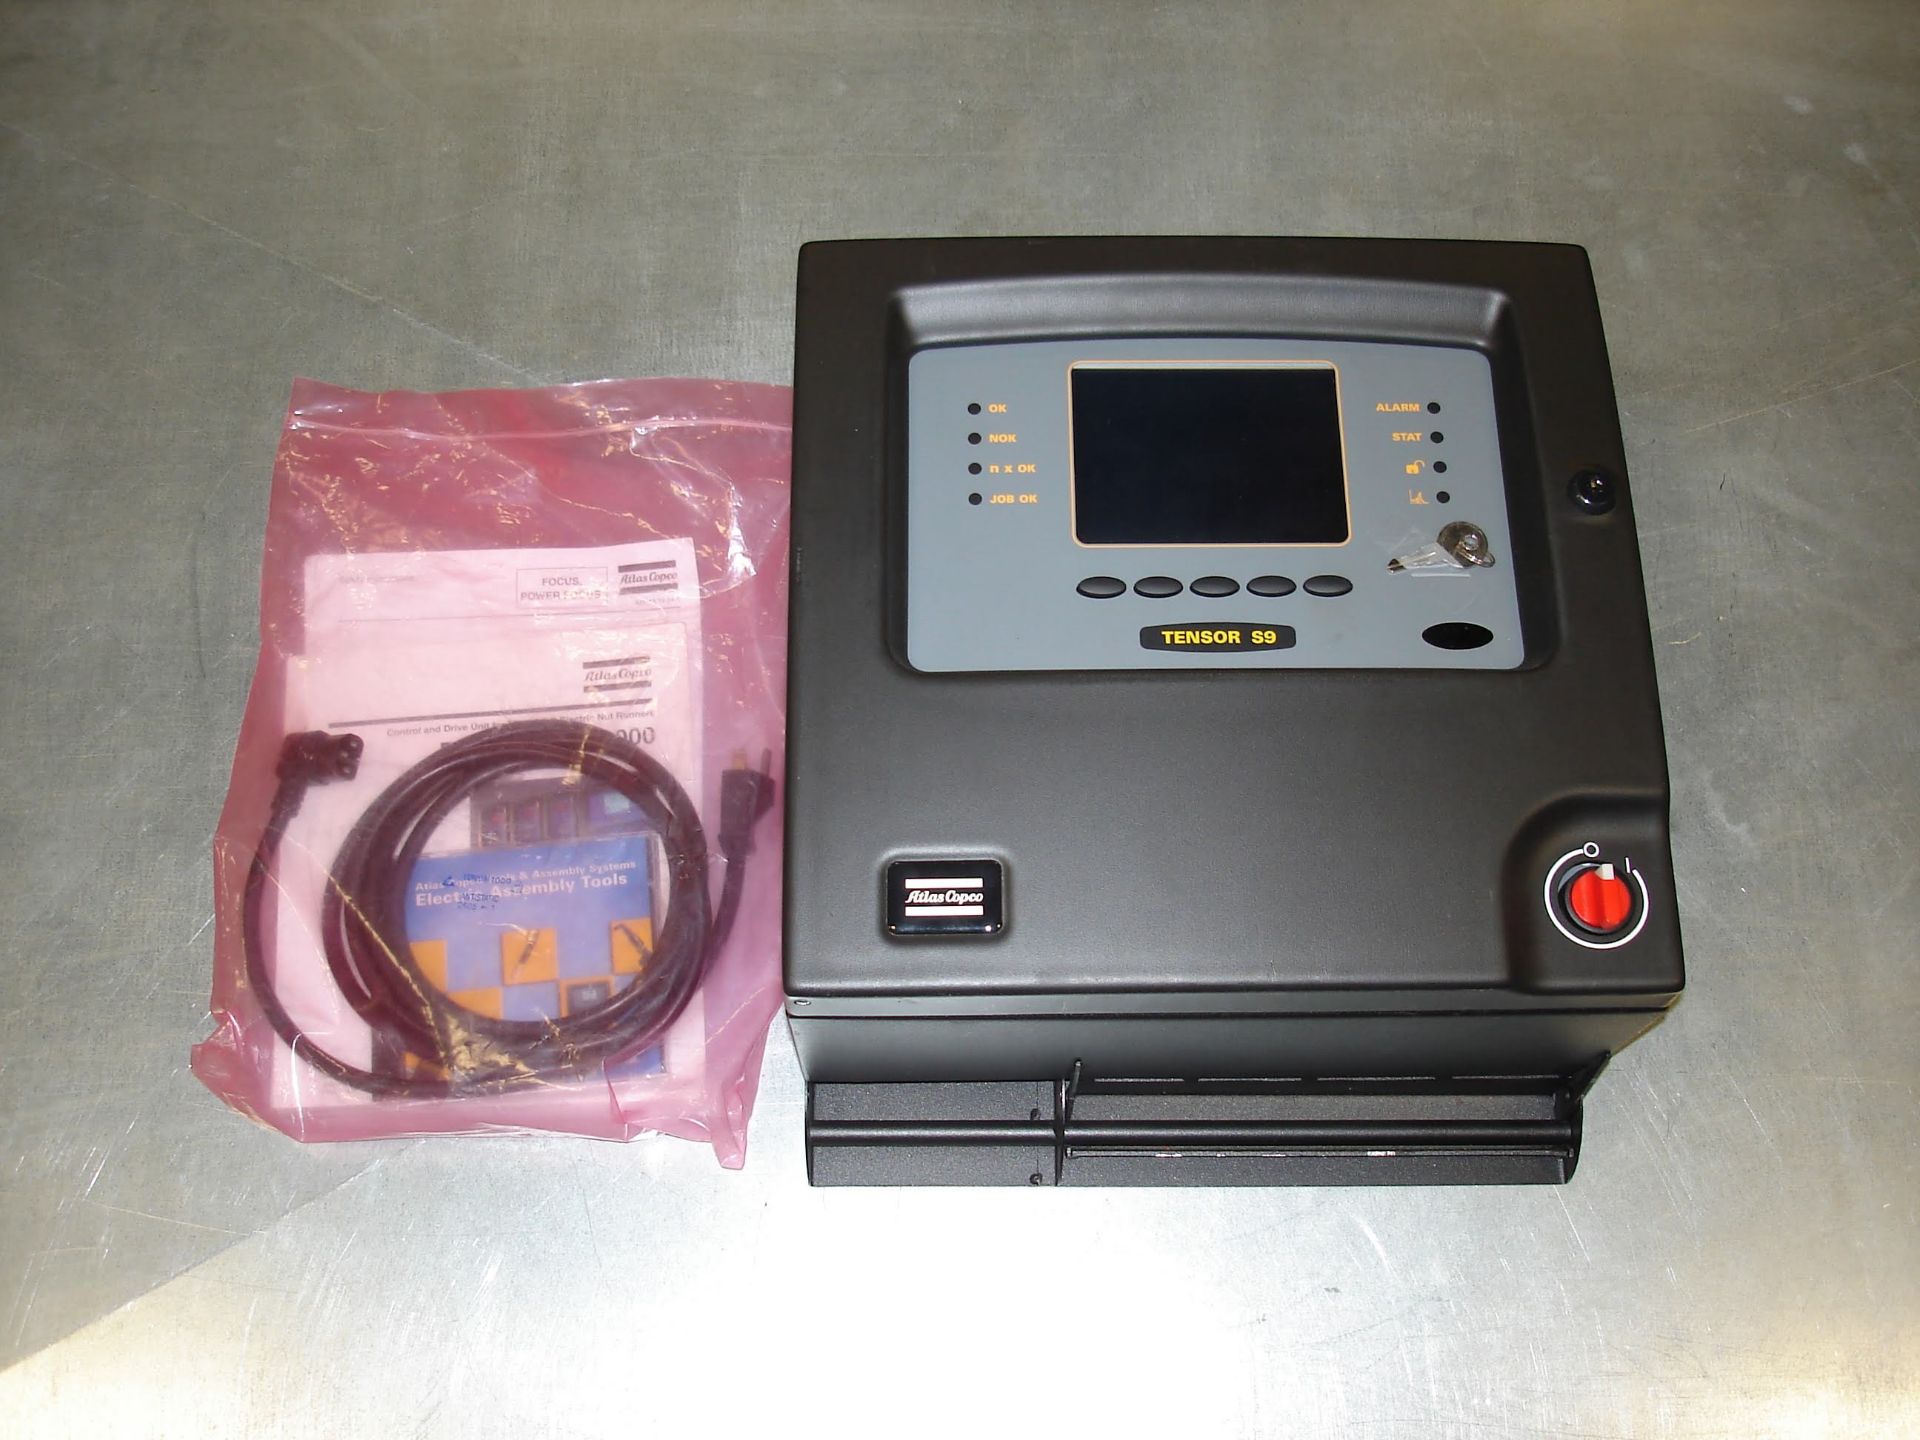 (1) 8433-1900-00 ATLAS COPCO CONTROL AND DRIVE UNIT NEW. Pickup your lot(s) for free! Shipping is